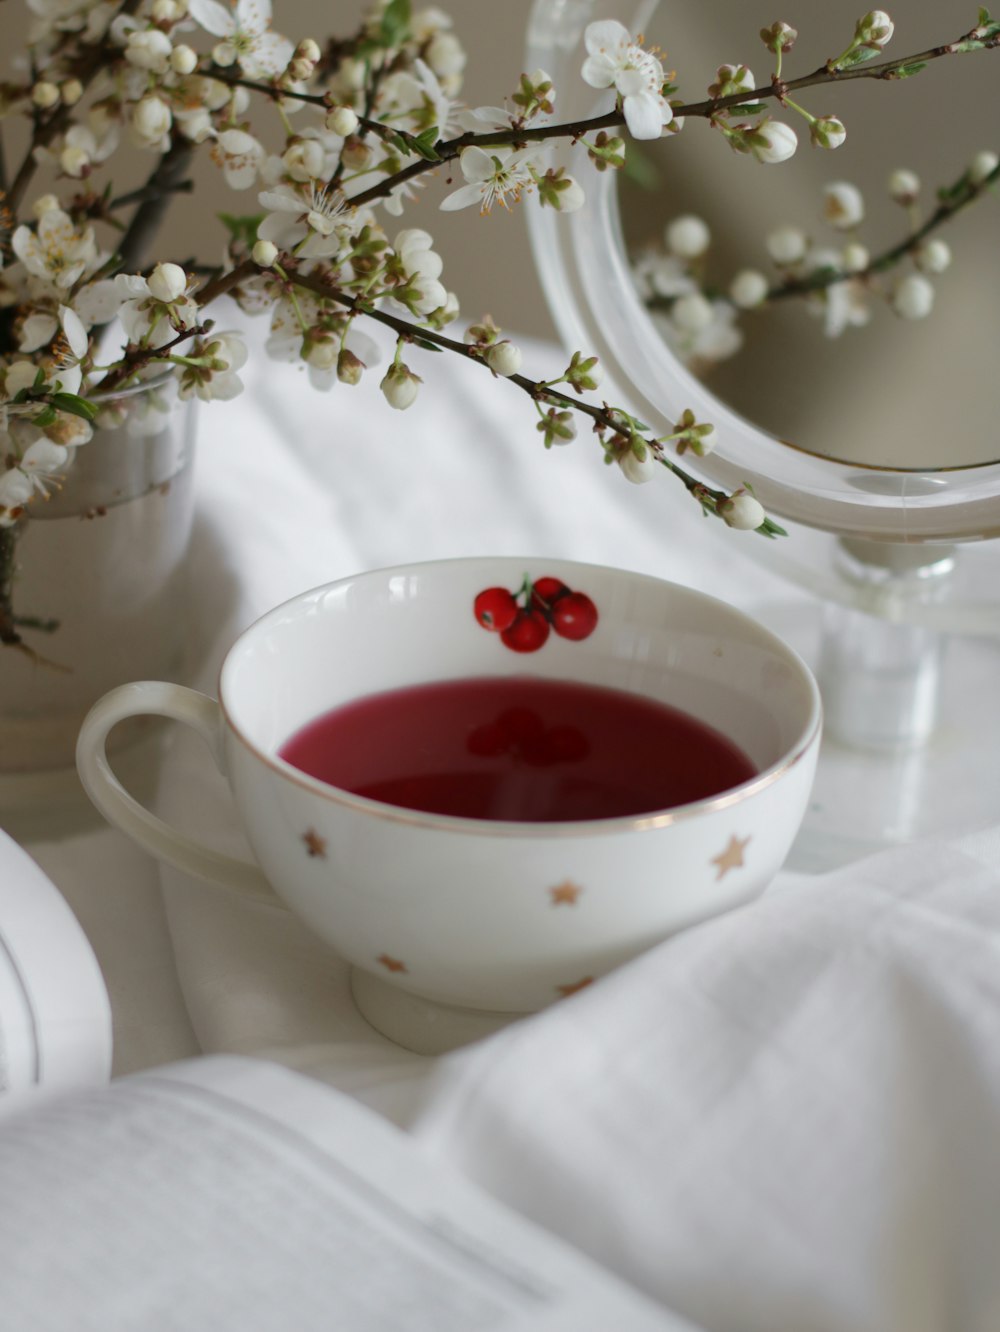 white ceramic teacup with red liquid inside